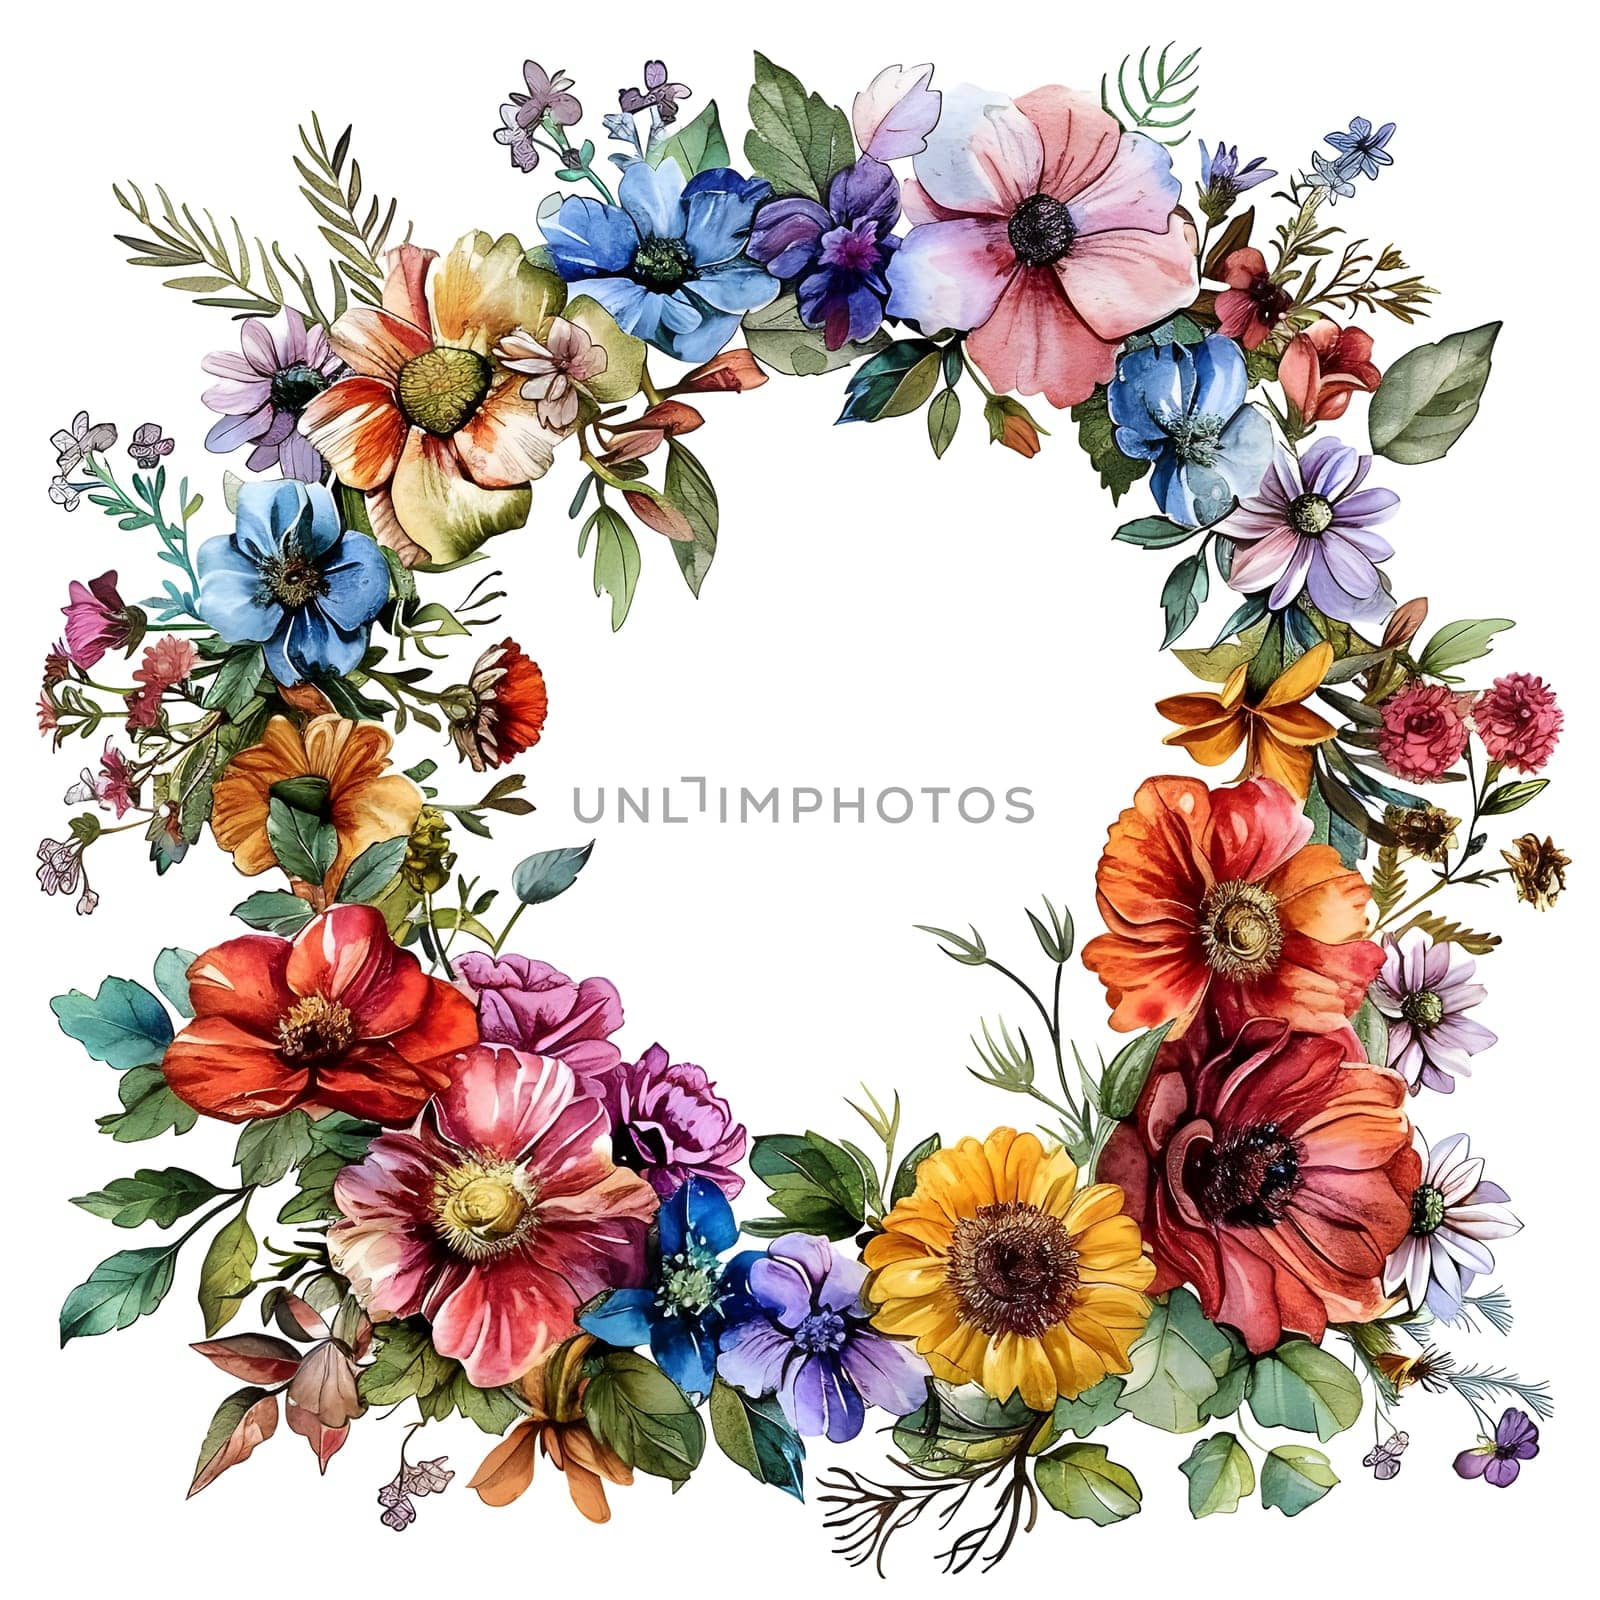 A creative arts masterpiece consisting of a wreath made of colorful flowers, leaves, and twigs arranged on a white rectangular dishware background